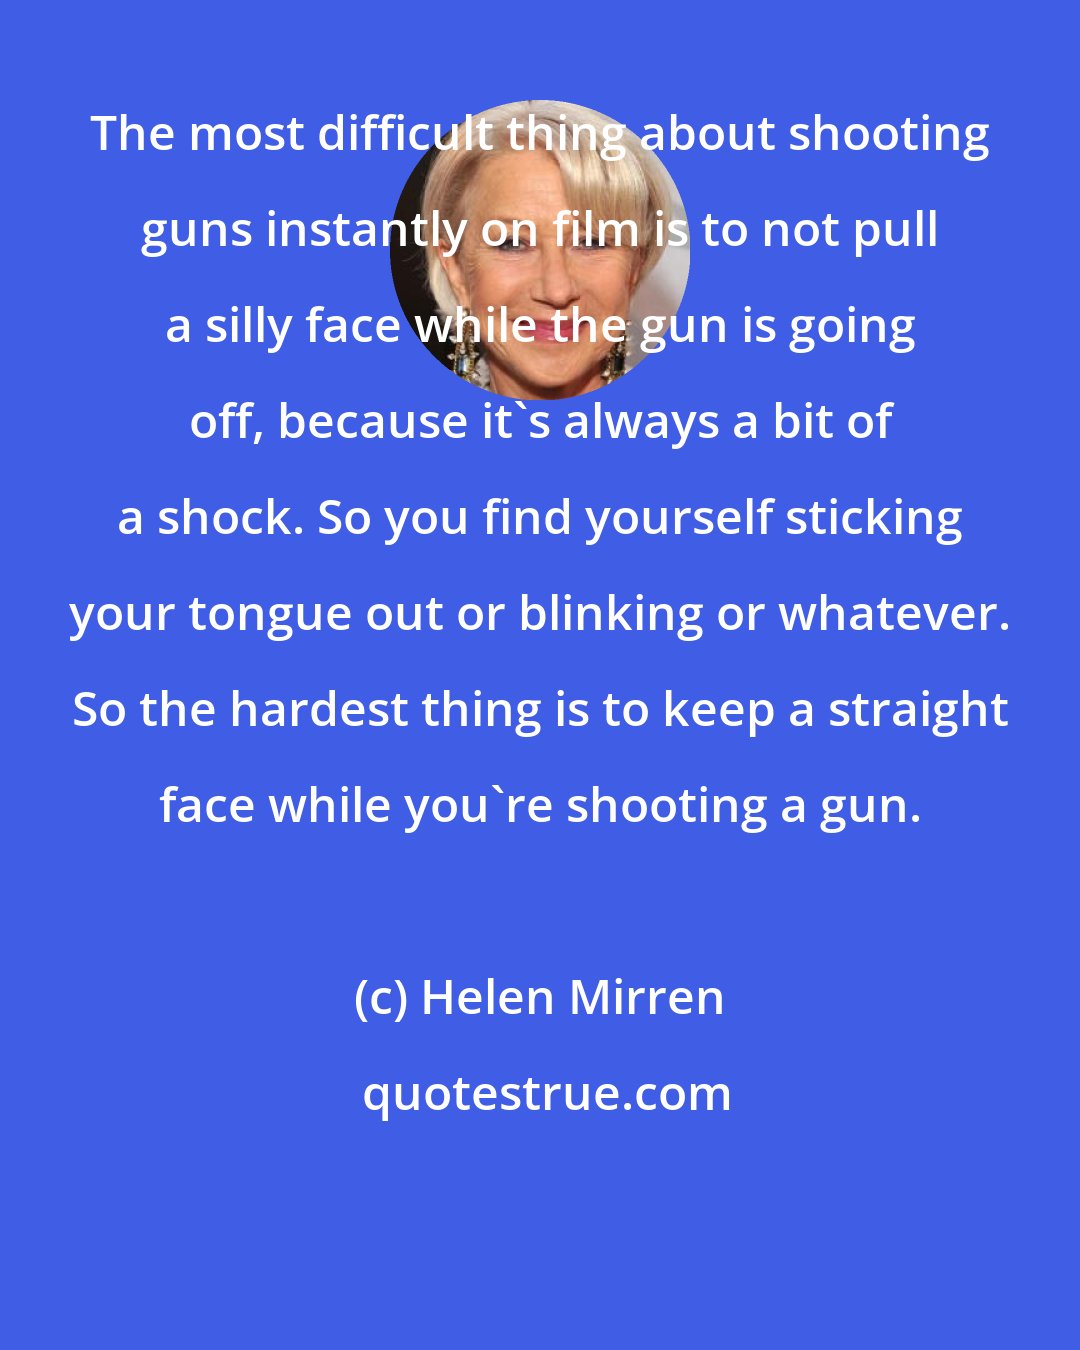 Helen Mirren: The most difficult thing about shooting guns instantly on film is to not pull a silly face while the gun is going off, because it's always a bit of a shock. So you find yourself sticking your tongue out or blinking or whatever. So the hardest thing is to keep a straight face while you're shooting a gun.